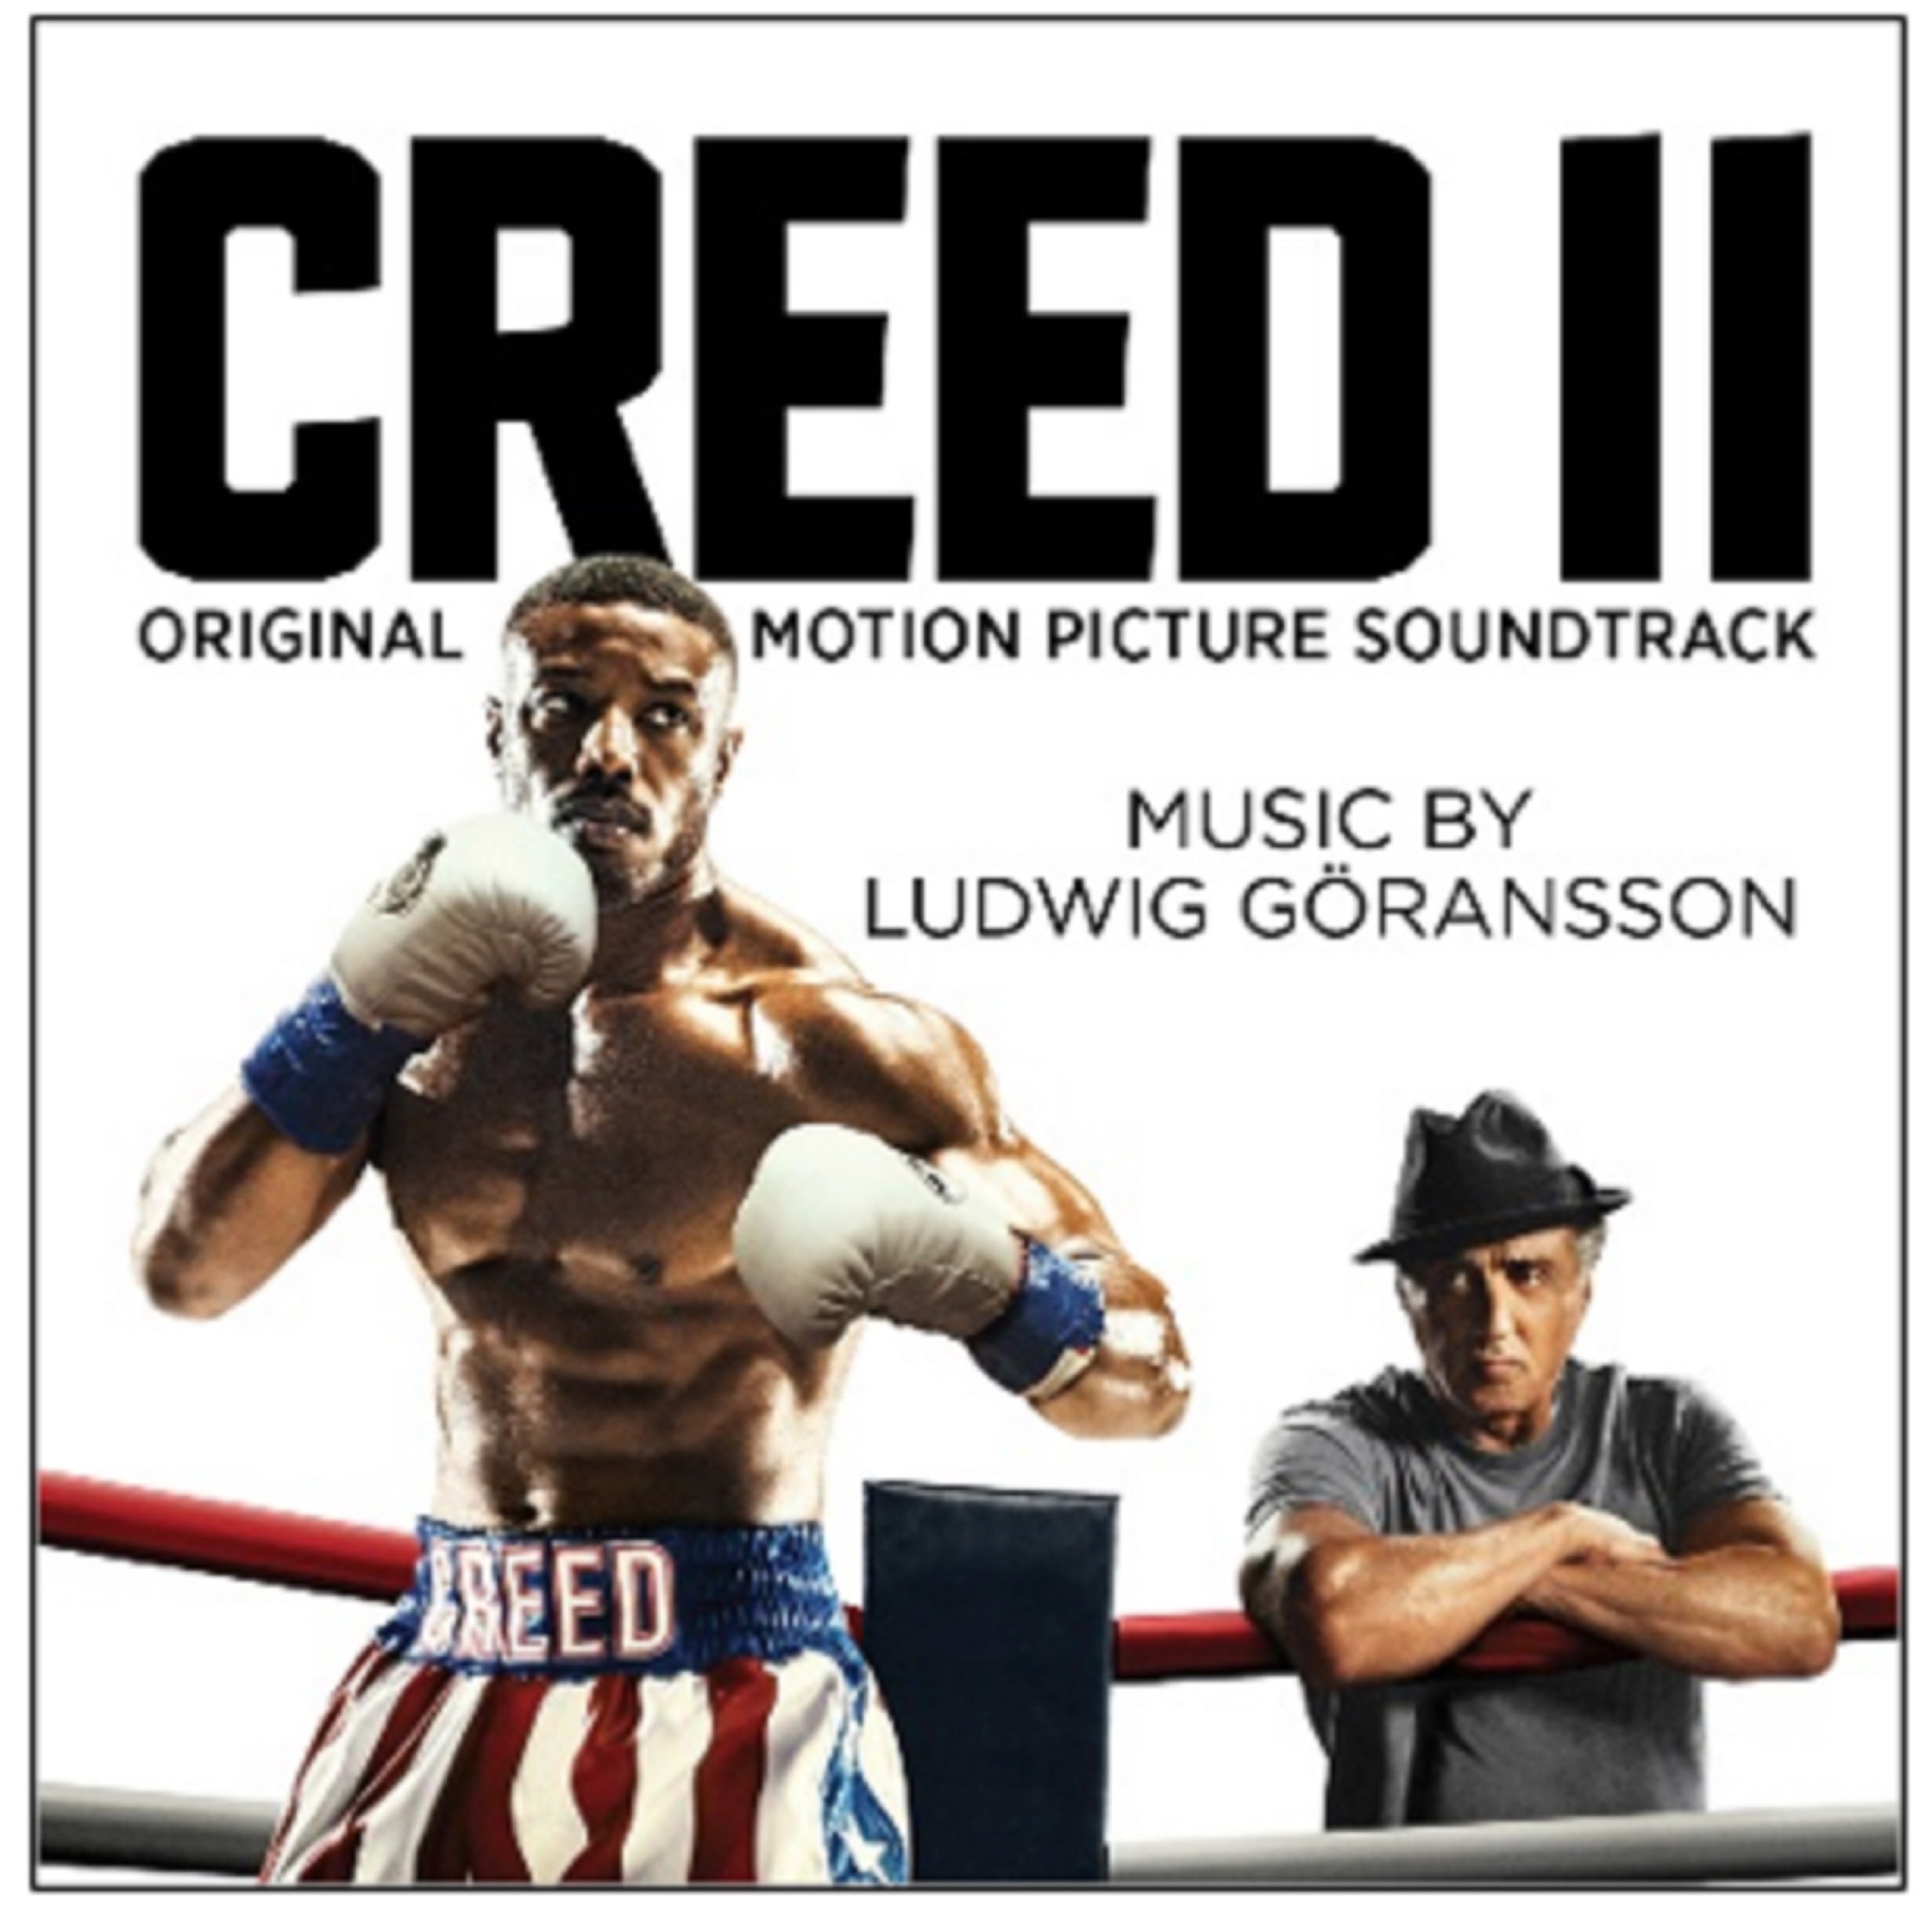 'Creed II' Original Motion Picture Soundtrack Out Now